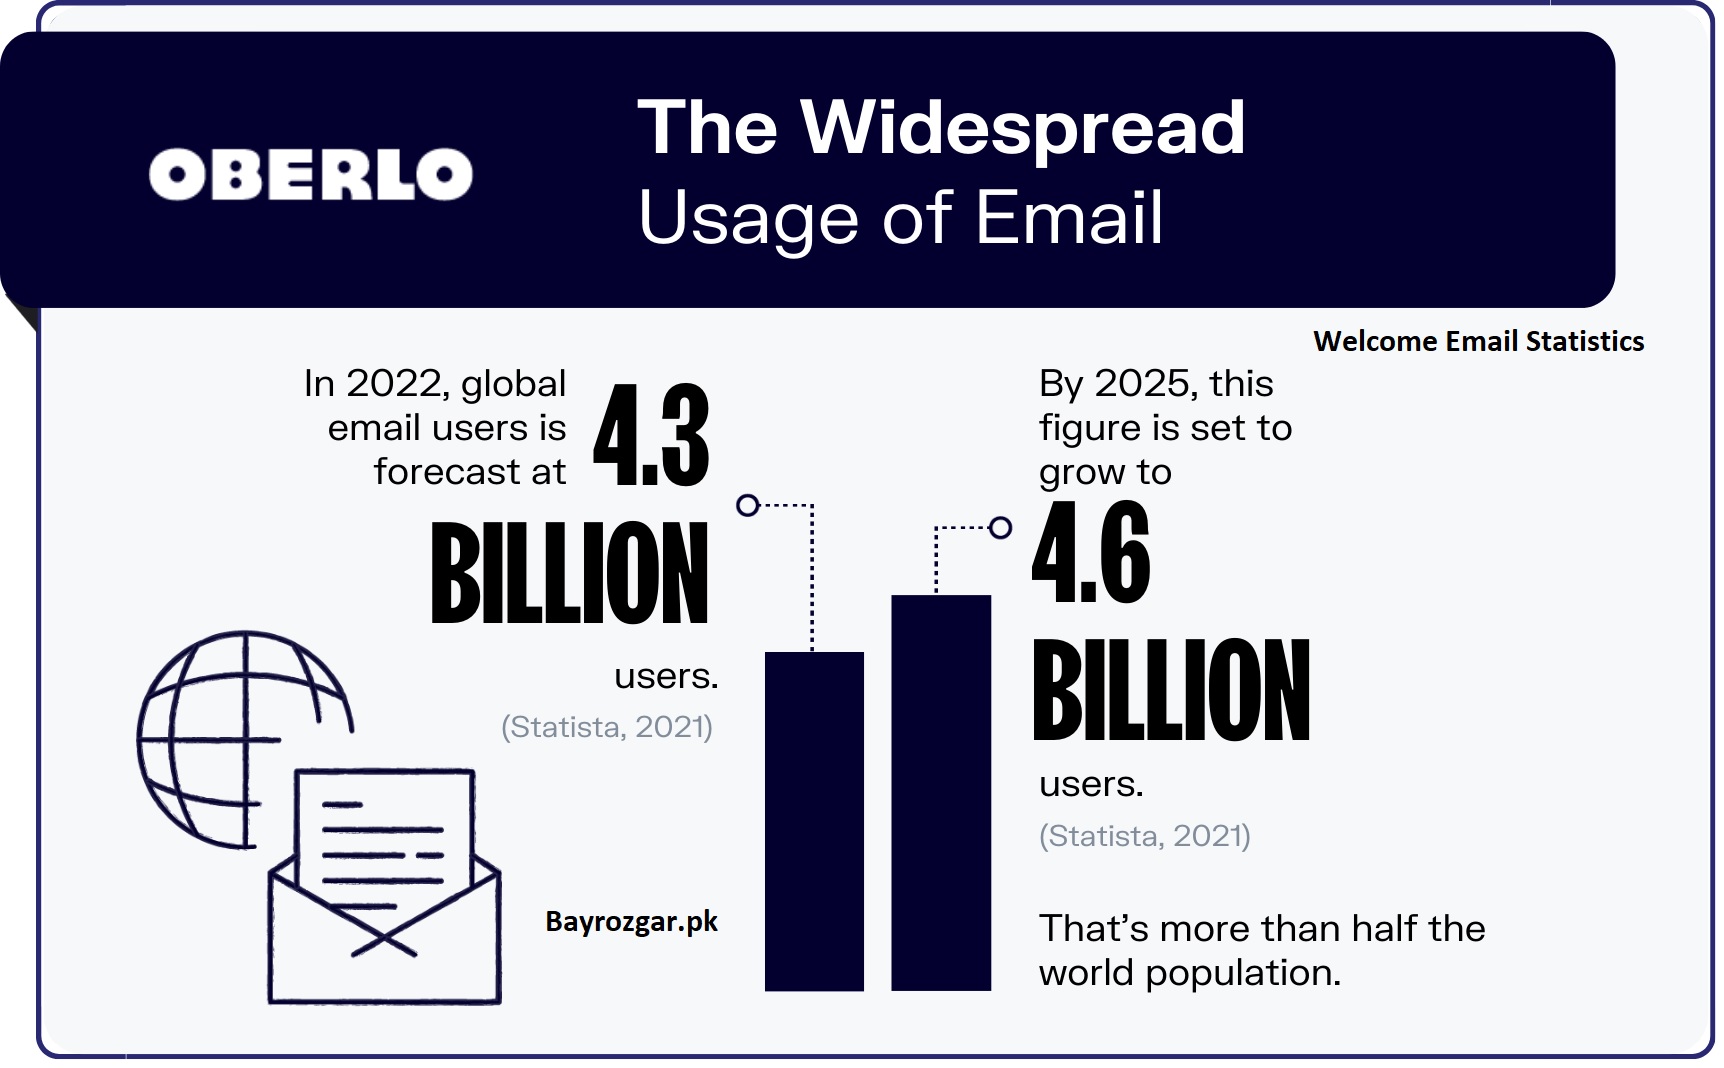 Welcome Email Statistics